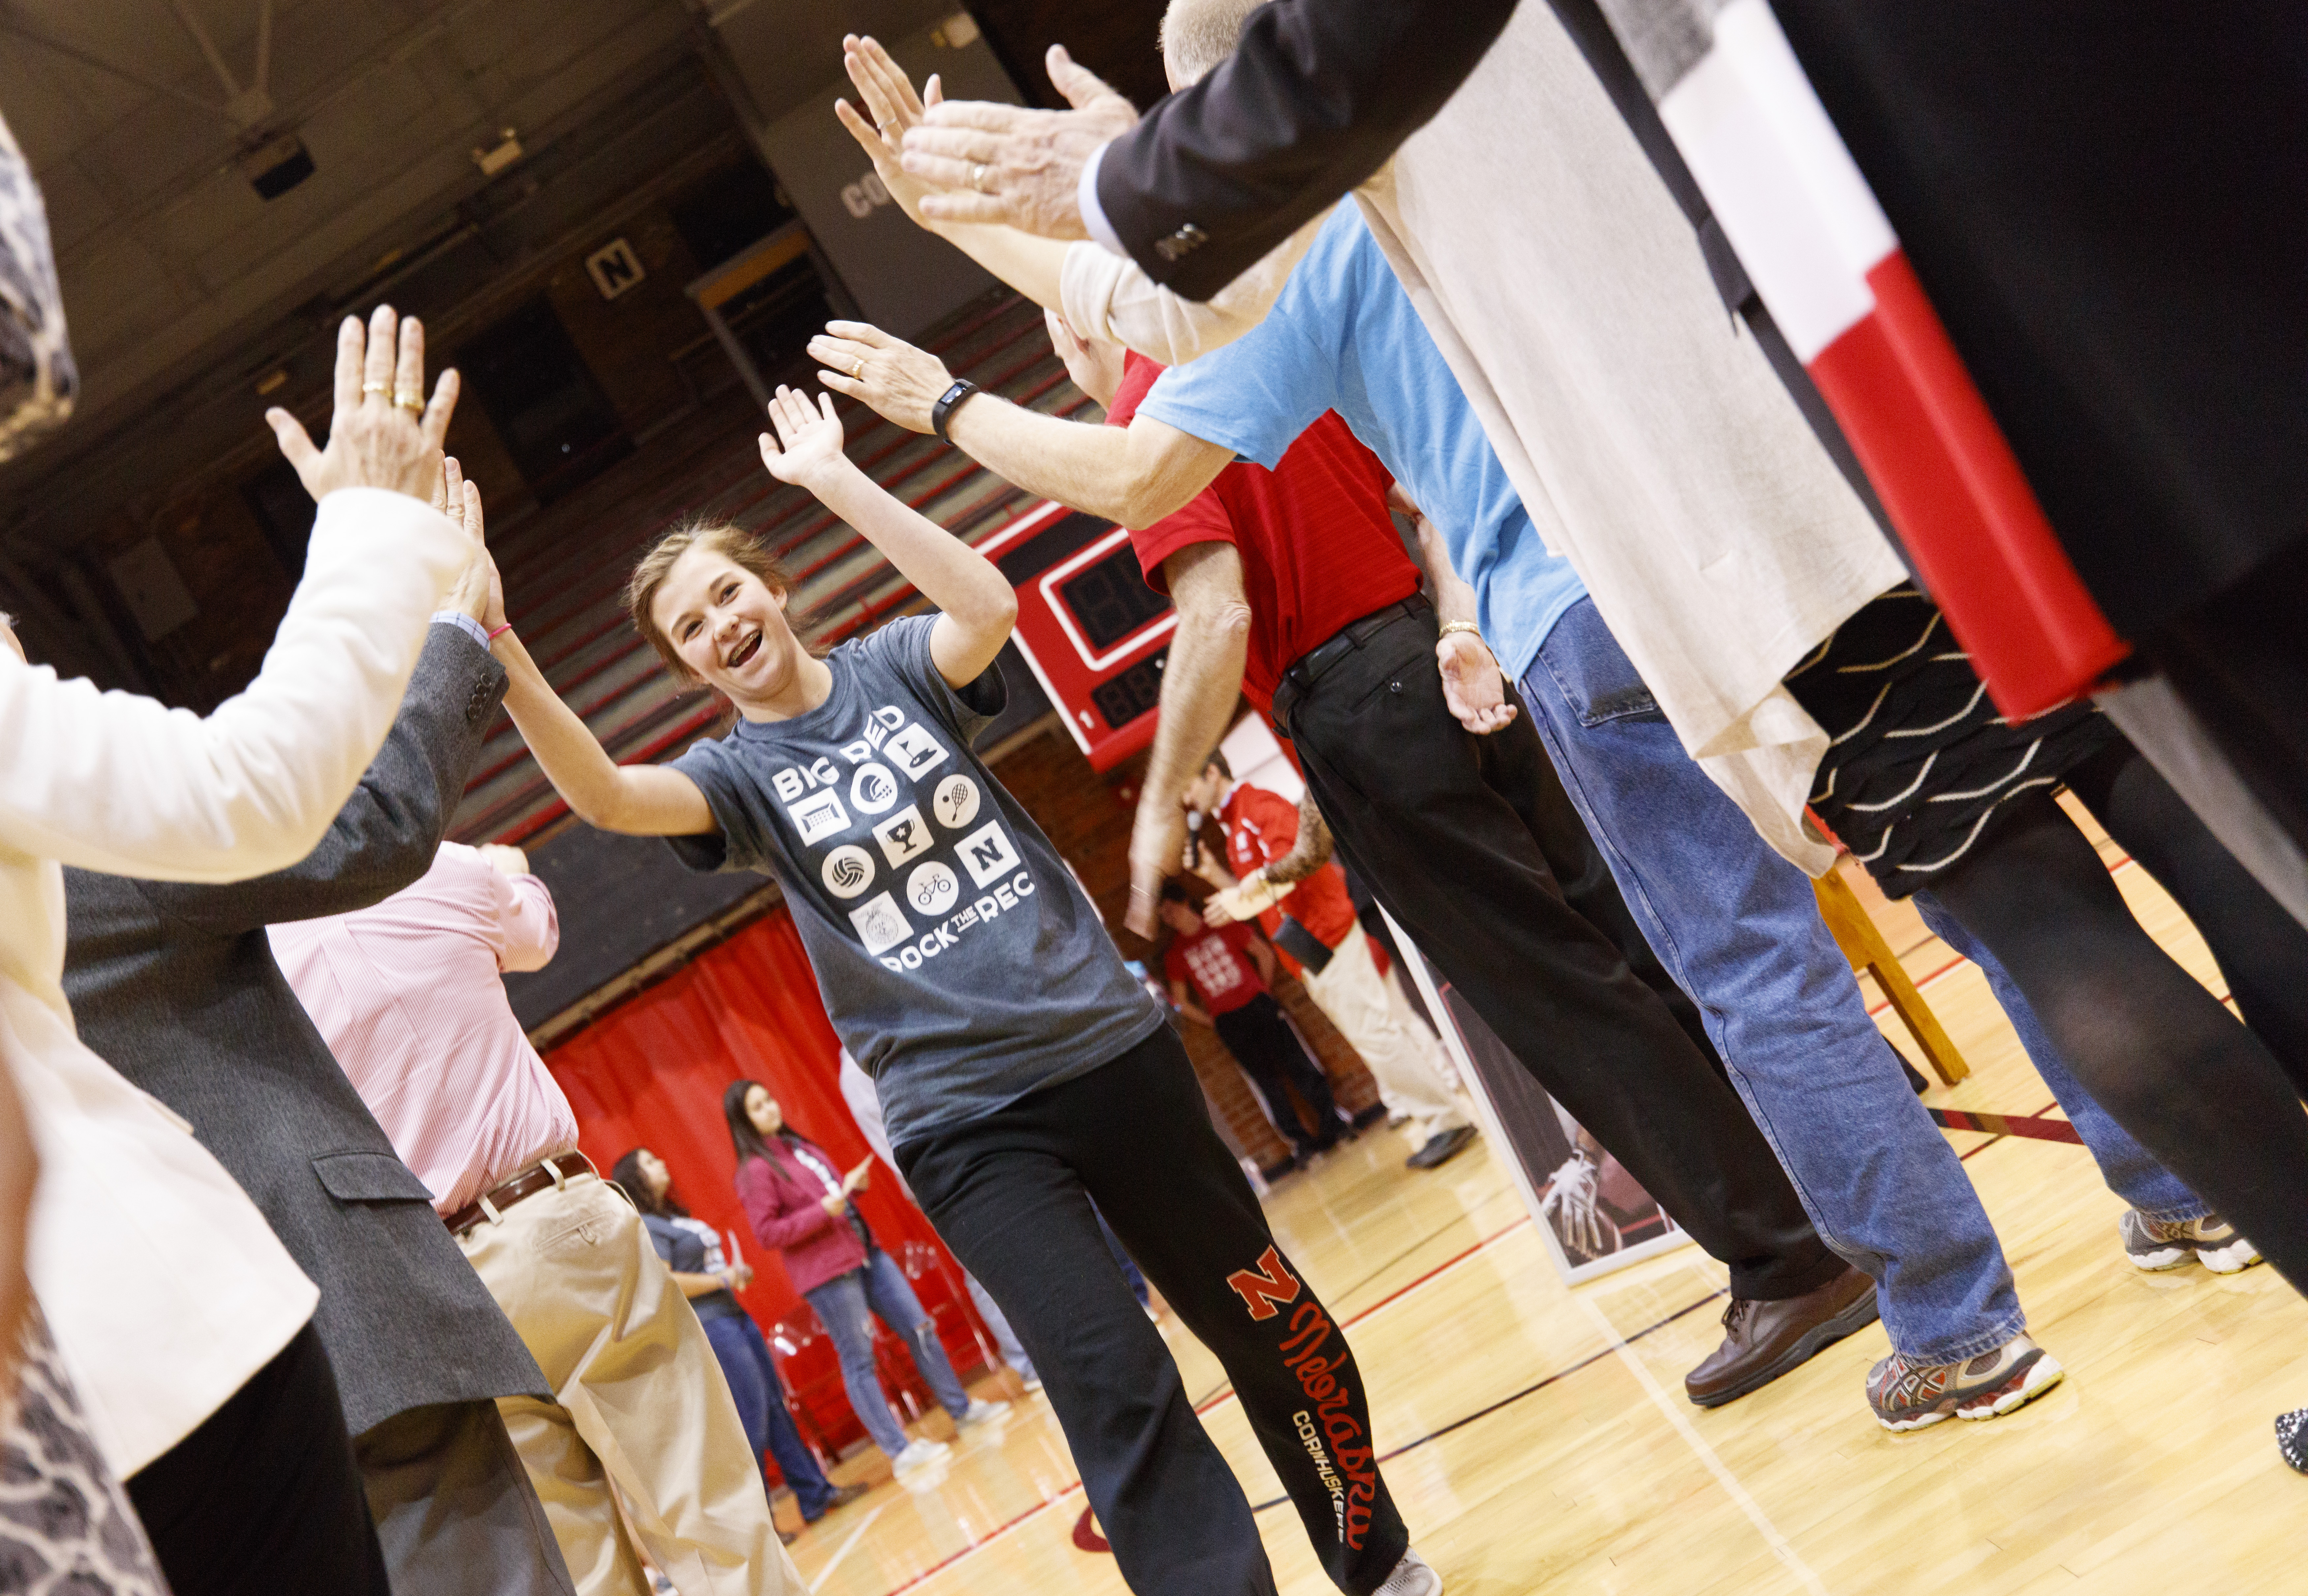 An FFA member and University of Nebraska-Lincoln commit receives high-fives during the signing ceremony April 6 at the Coliseum.